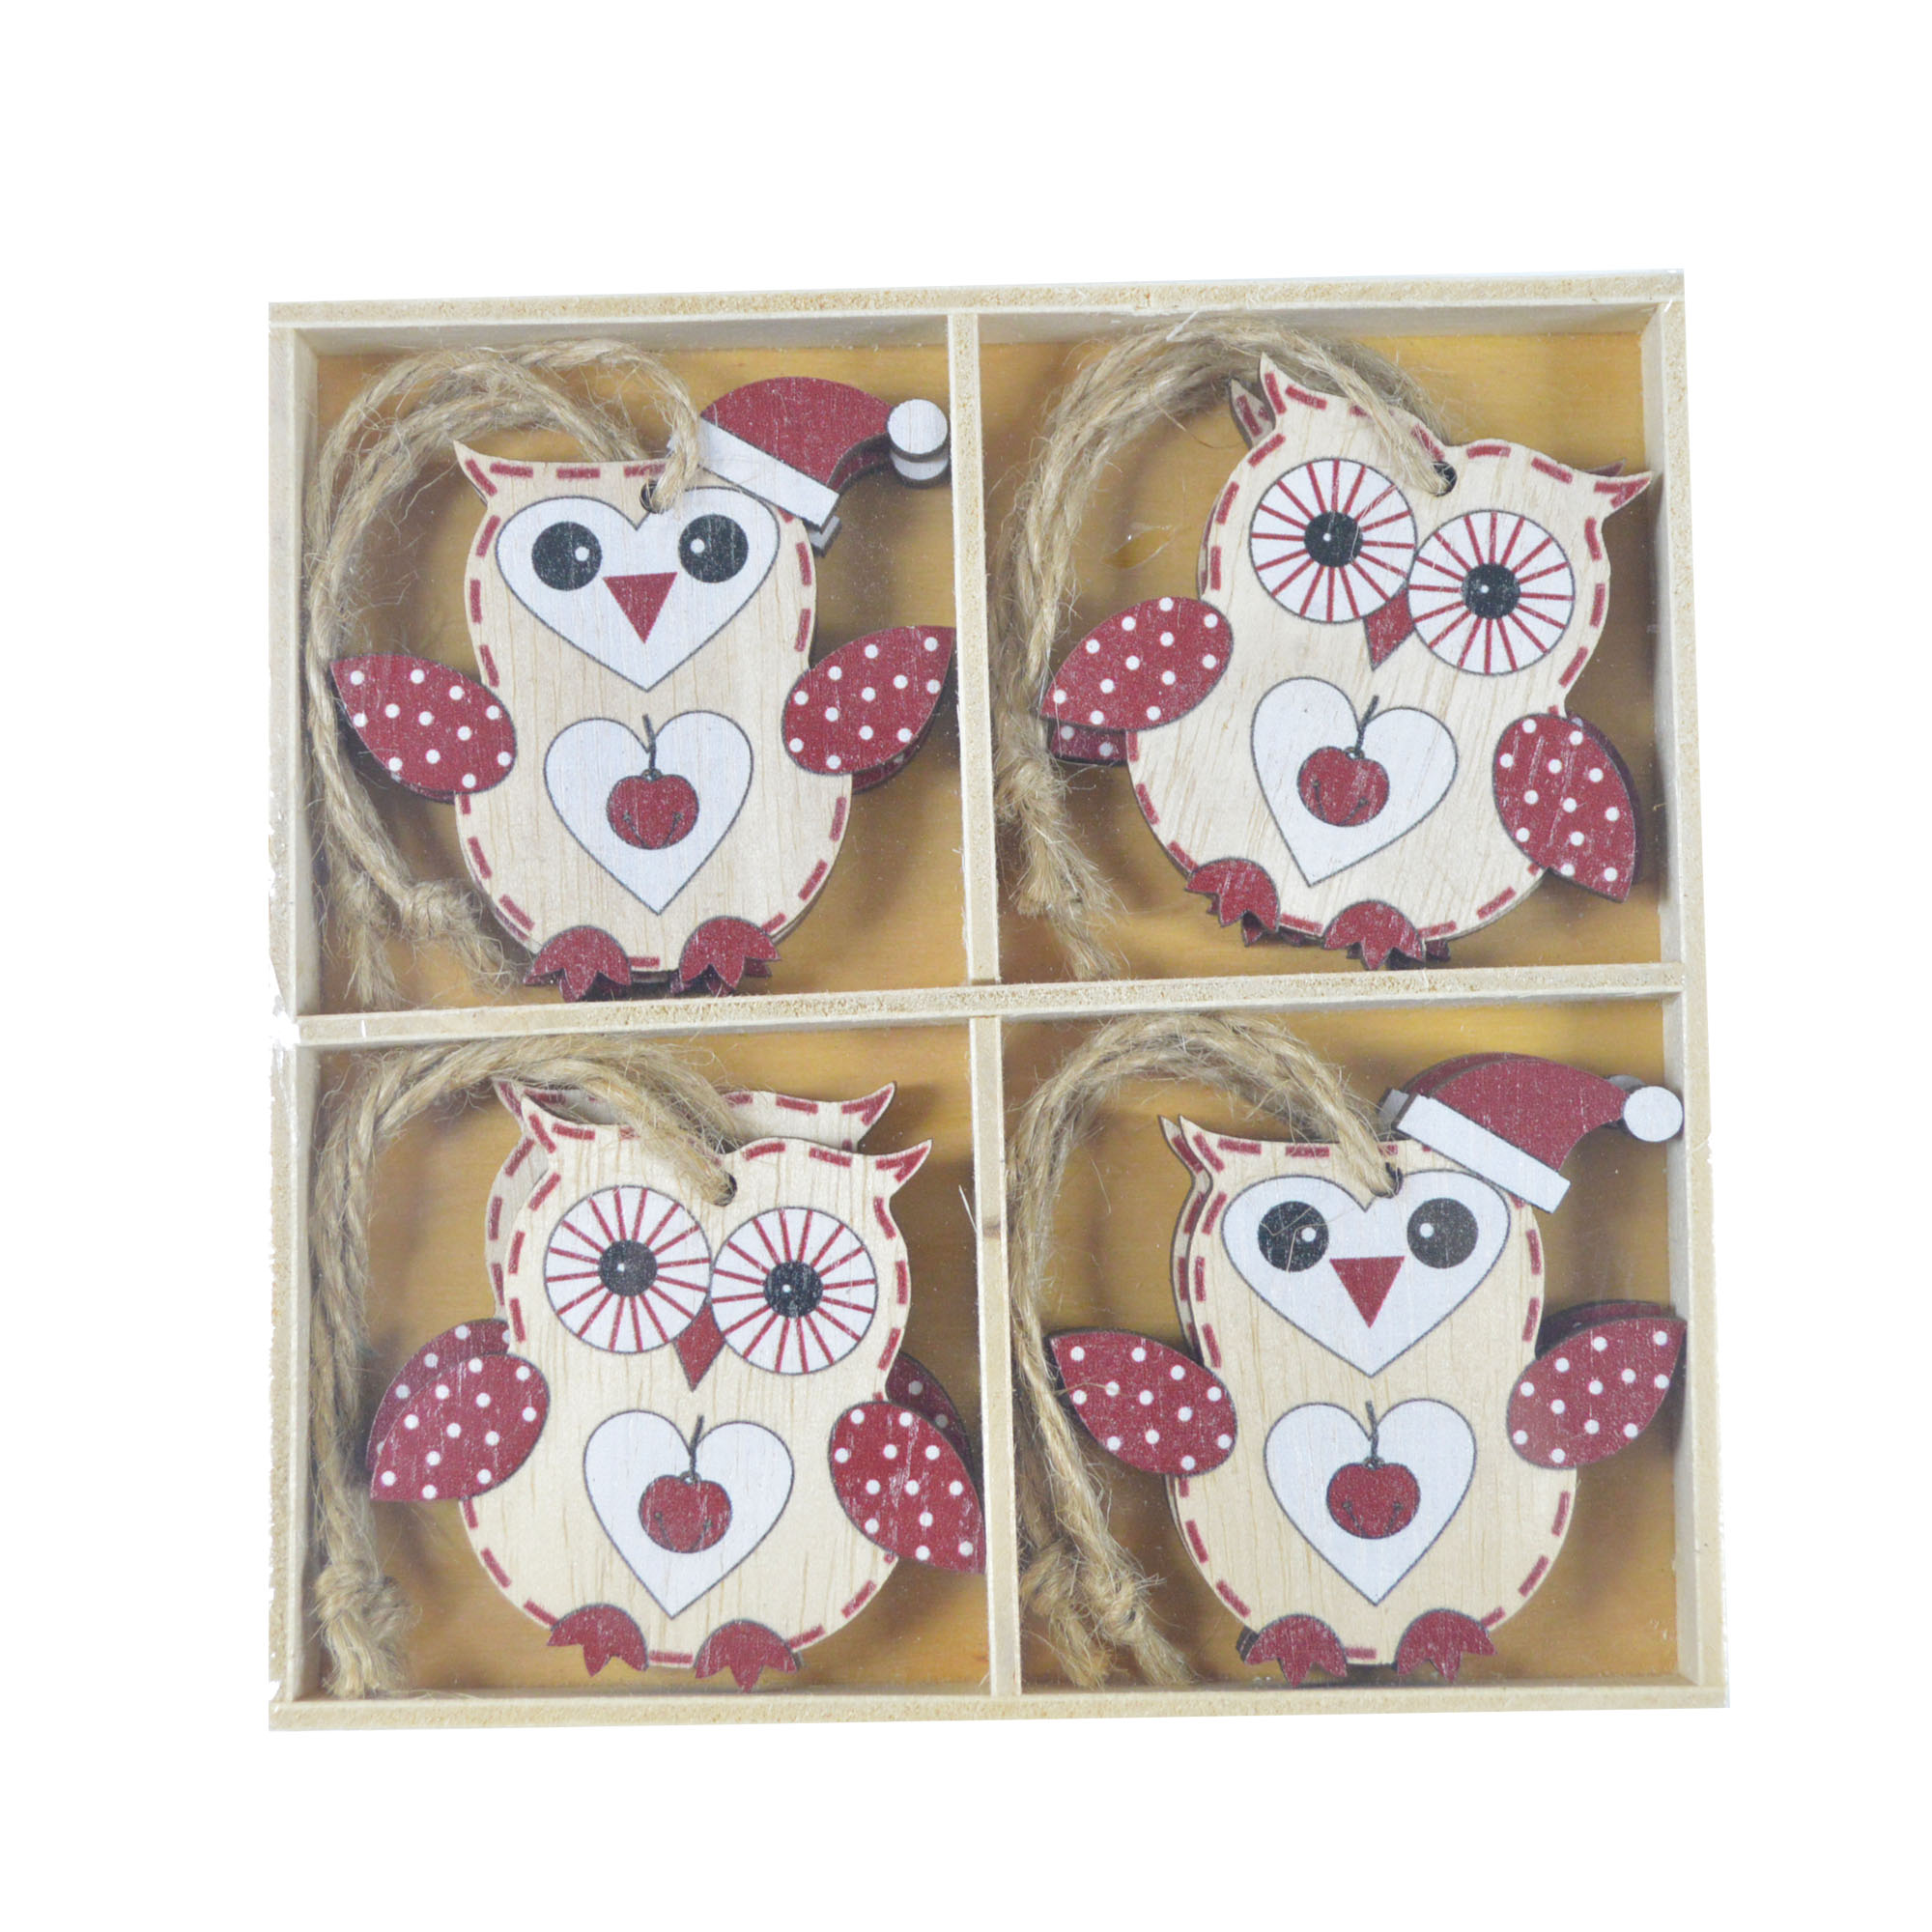 Wholesales Pretty Packaging Gift Wrap Ideas Wooden mini baby owl cute hanging wood pendant home decor